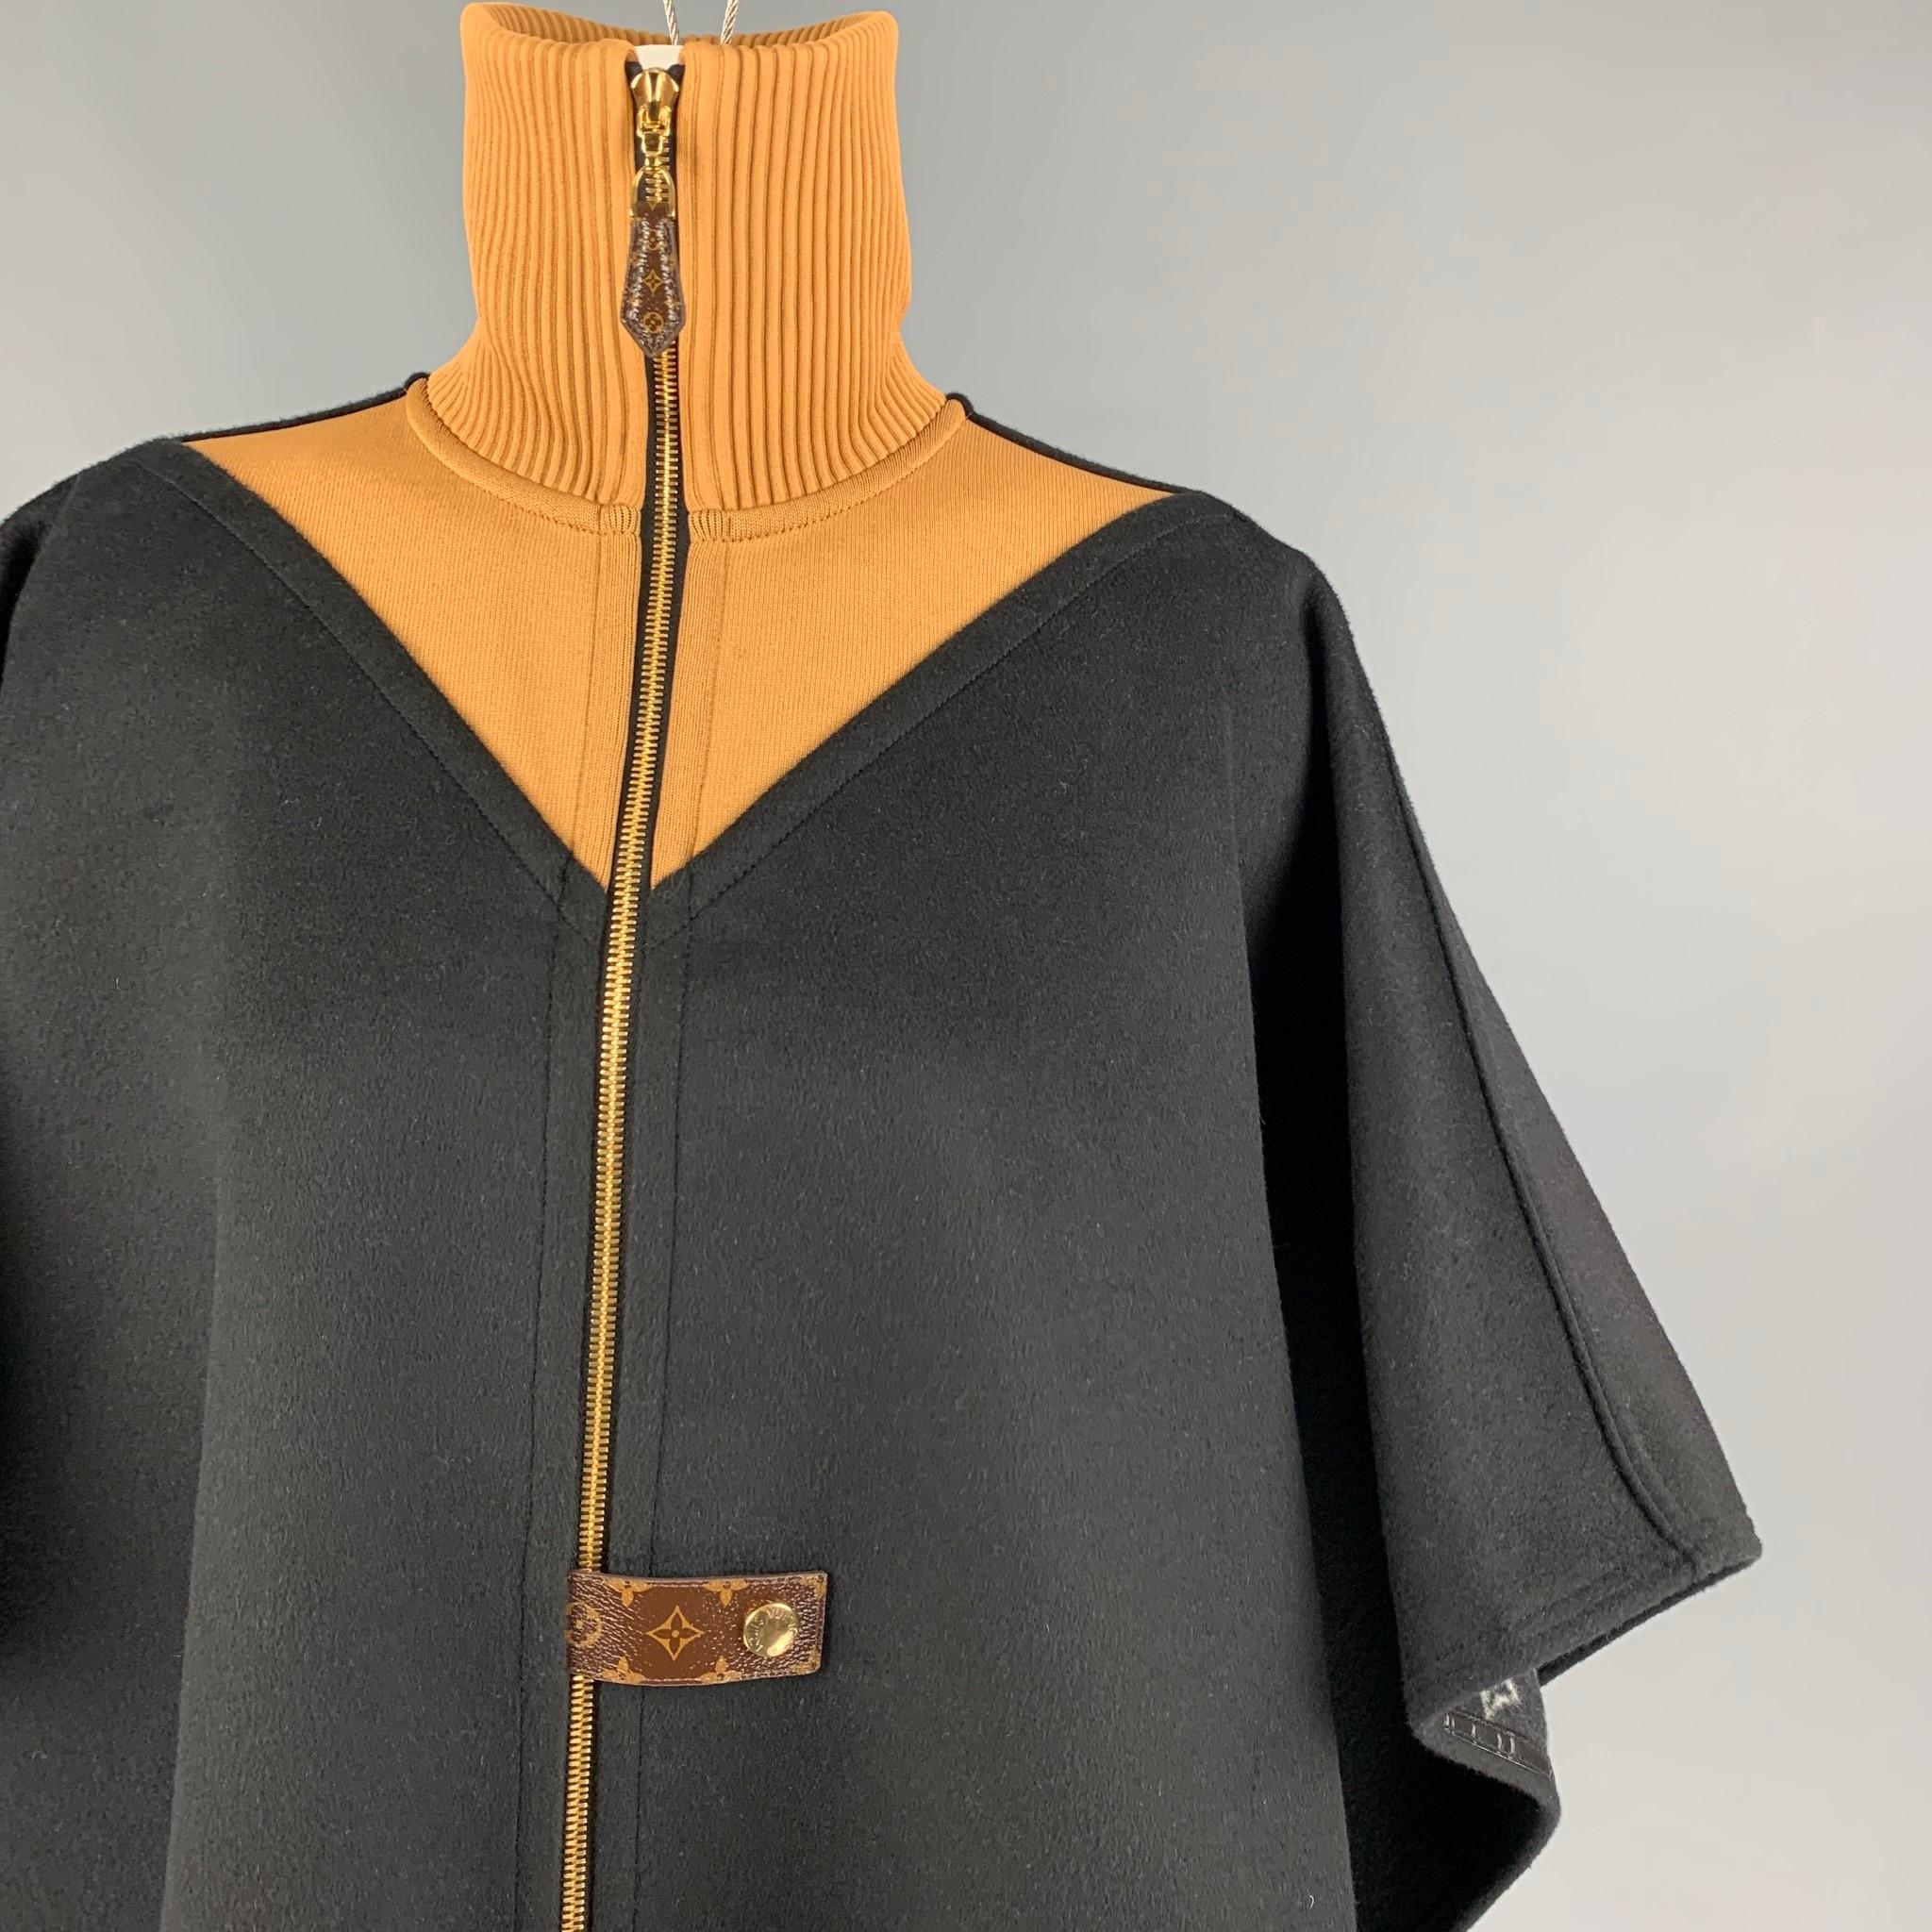 LOUIS VUITTON 'Double Face' cape comes in a black & tan wool / silk with a monogram interior featuring a ribbed high neck, relaxed fit, monogram canvas accents, and a full zip up closure. Made in France. 

Excellent Pre-Owned Condition.
Marked: